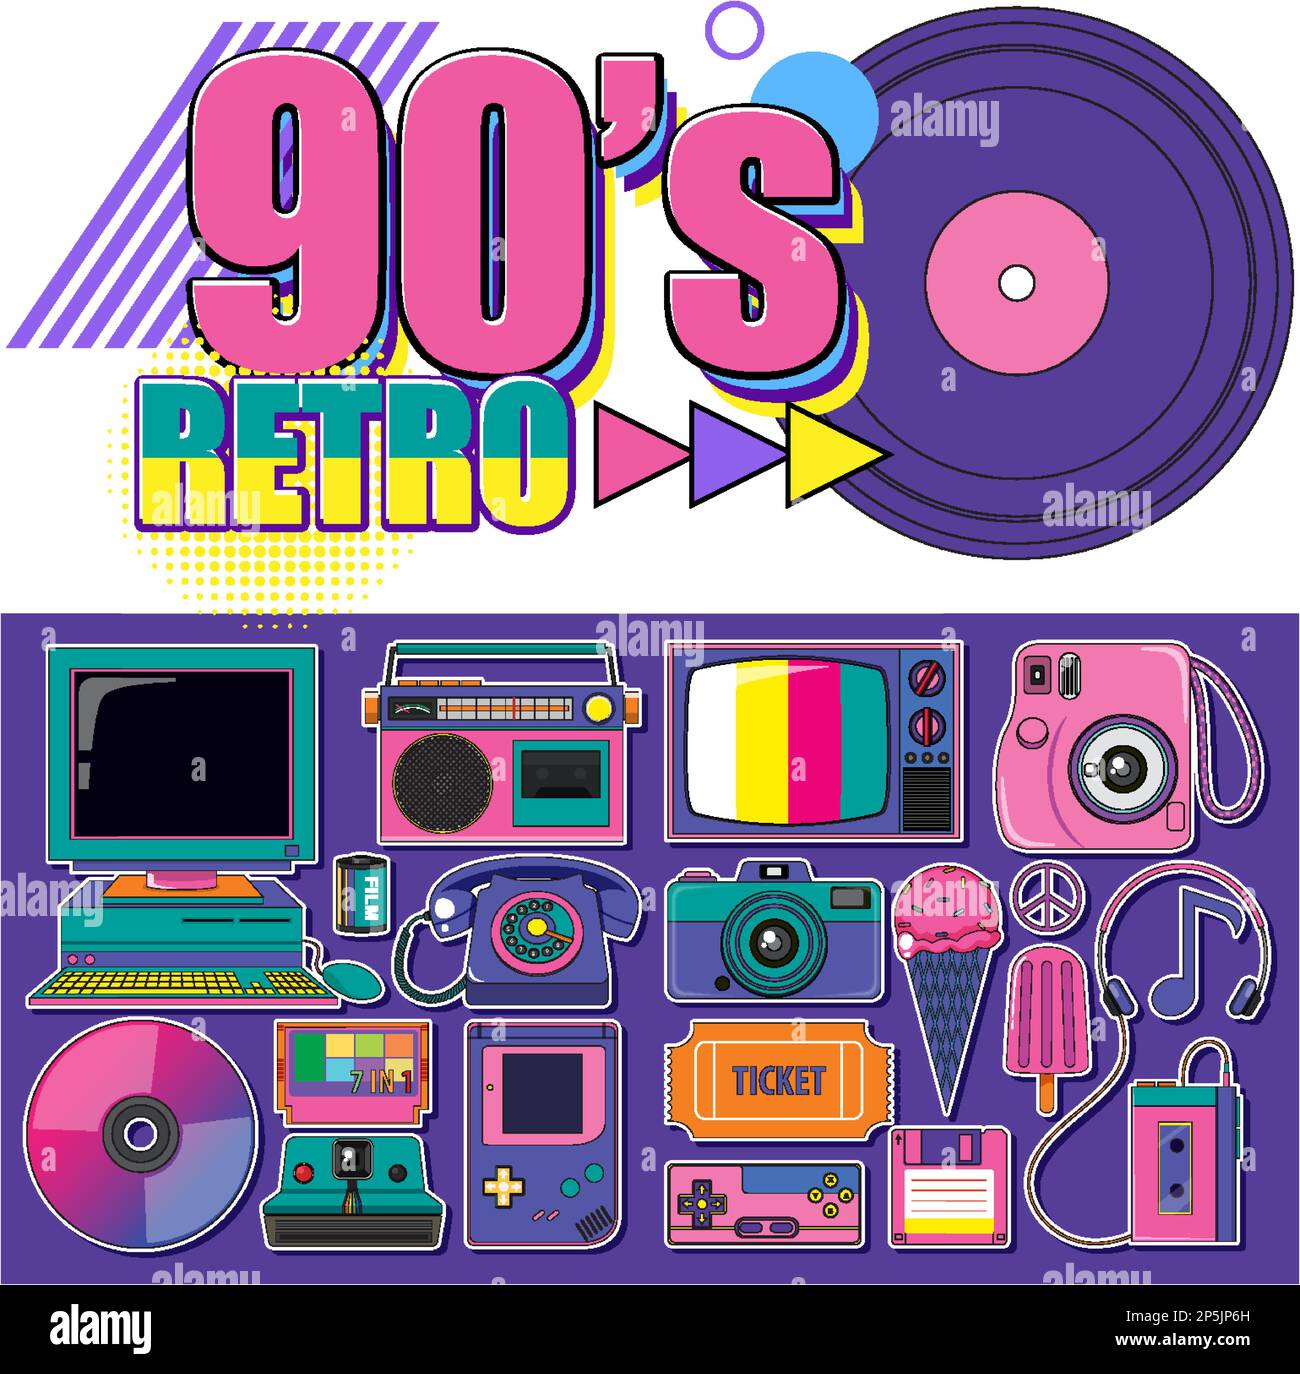 90s retro objects and elements set illustration Stock Vector Image ...